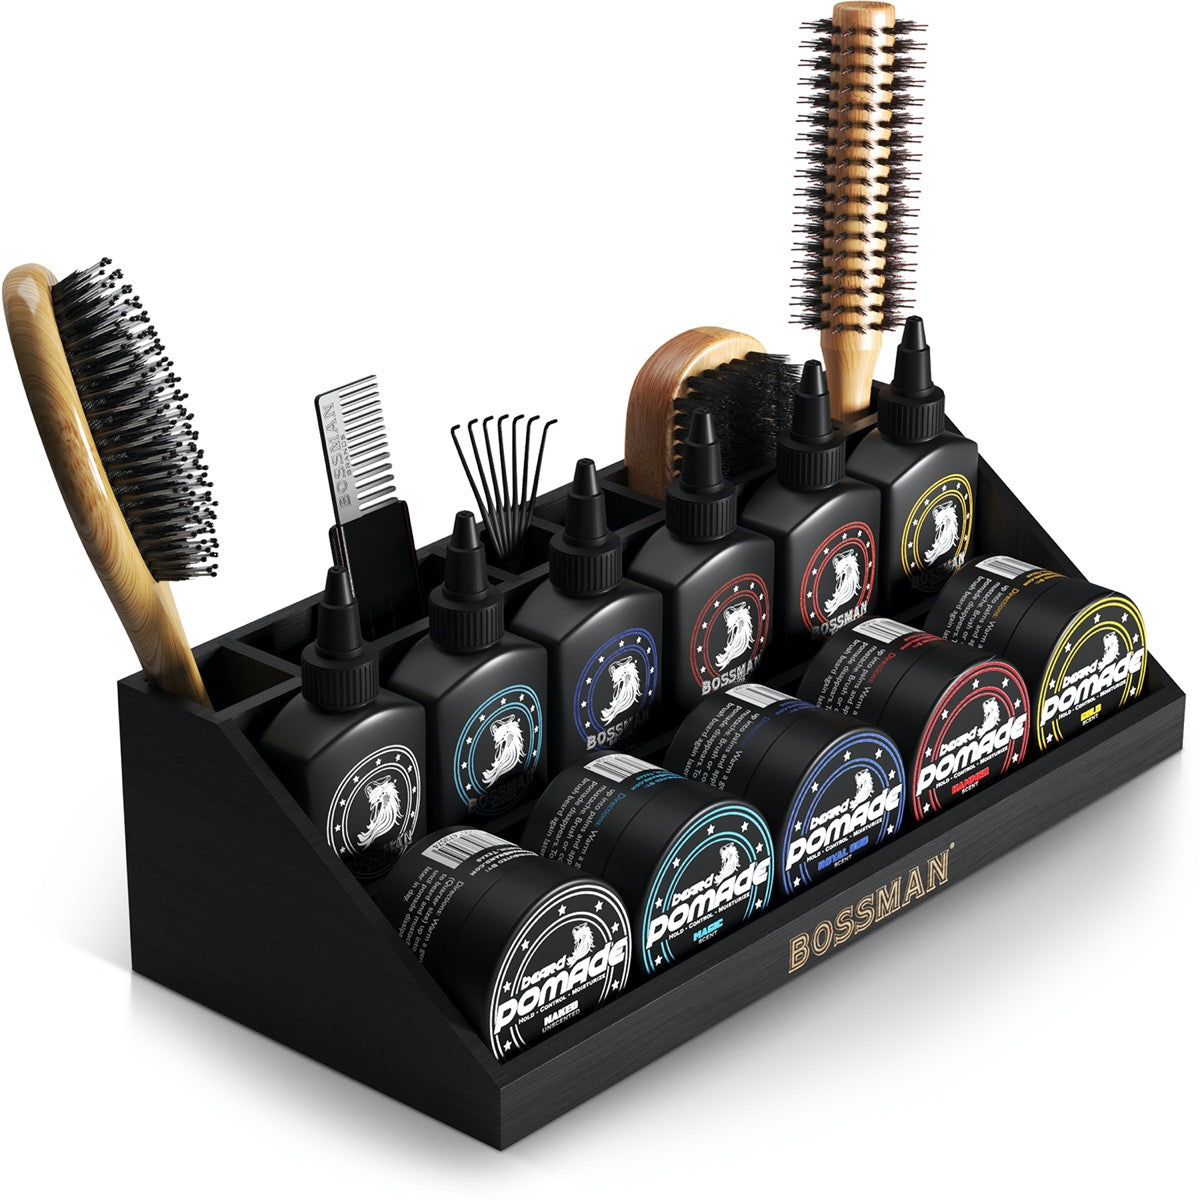 Beard Caddy Organizer for Grooming Products - Men'S Bathroom